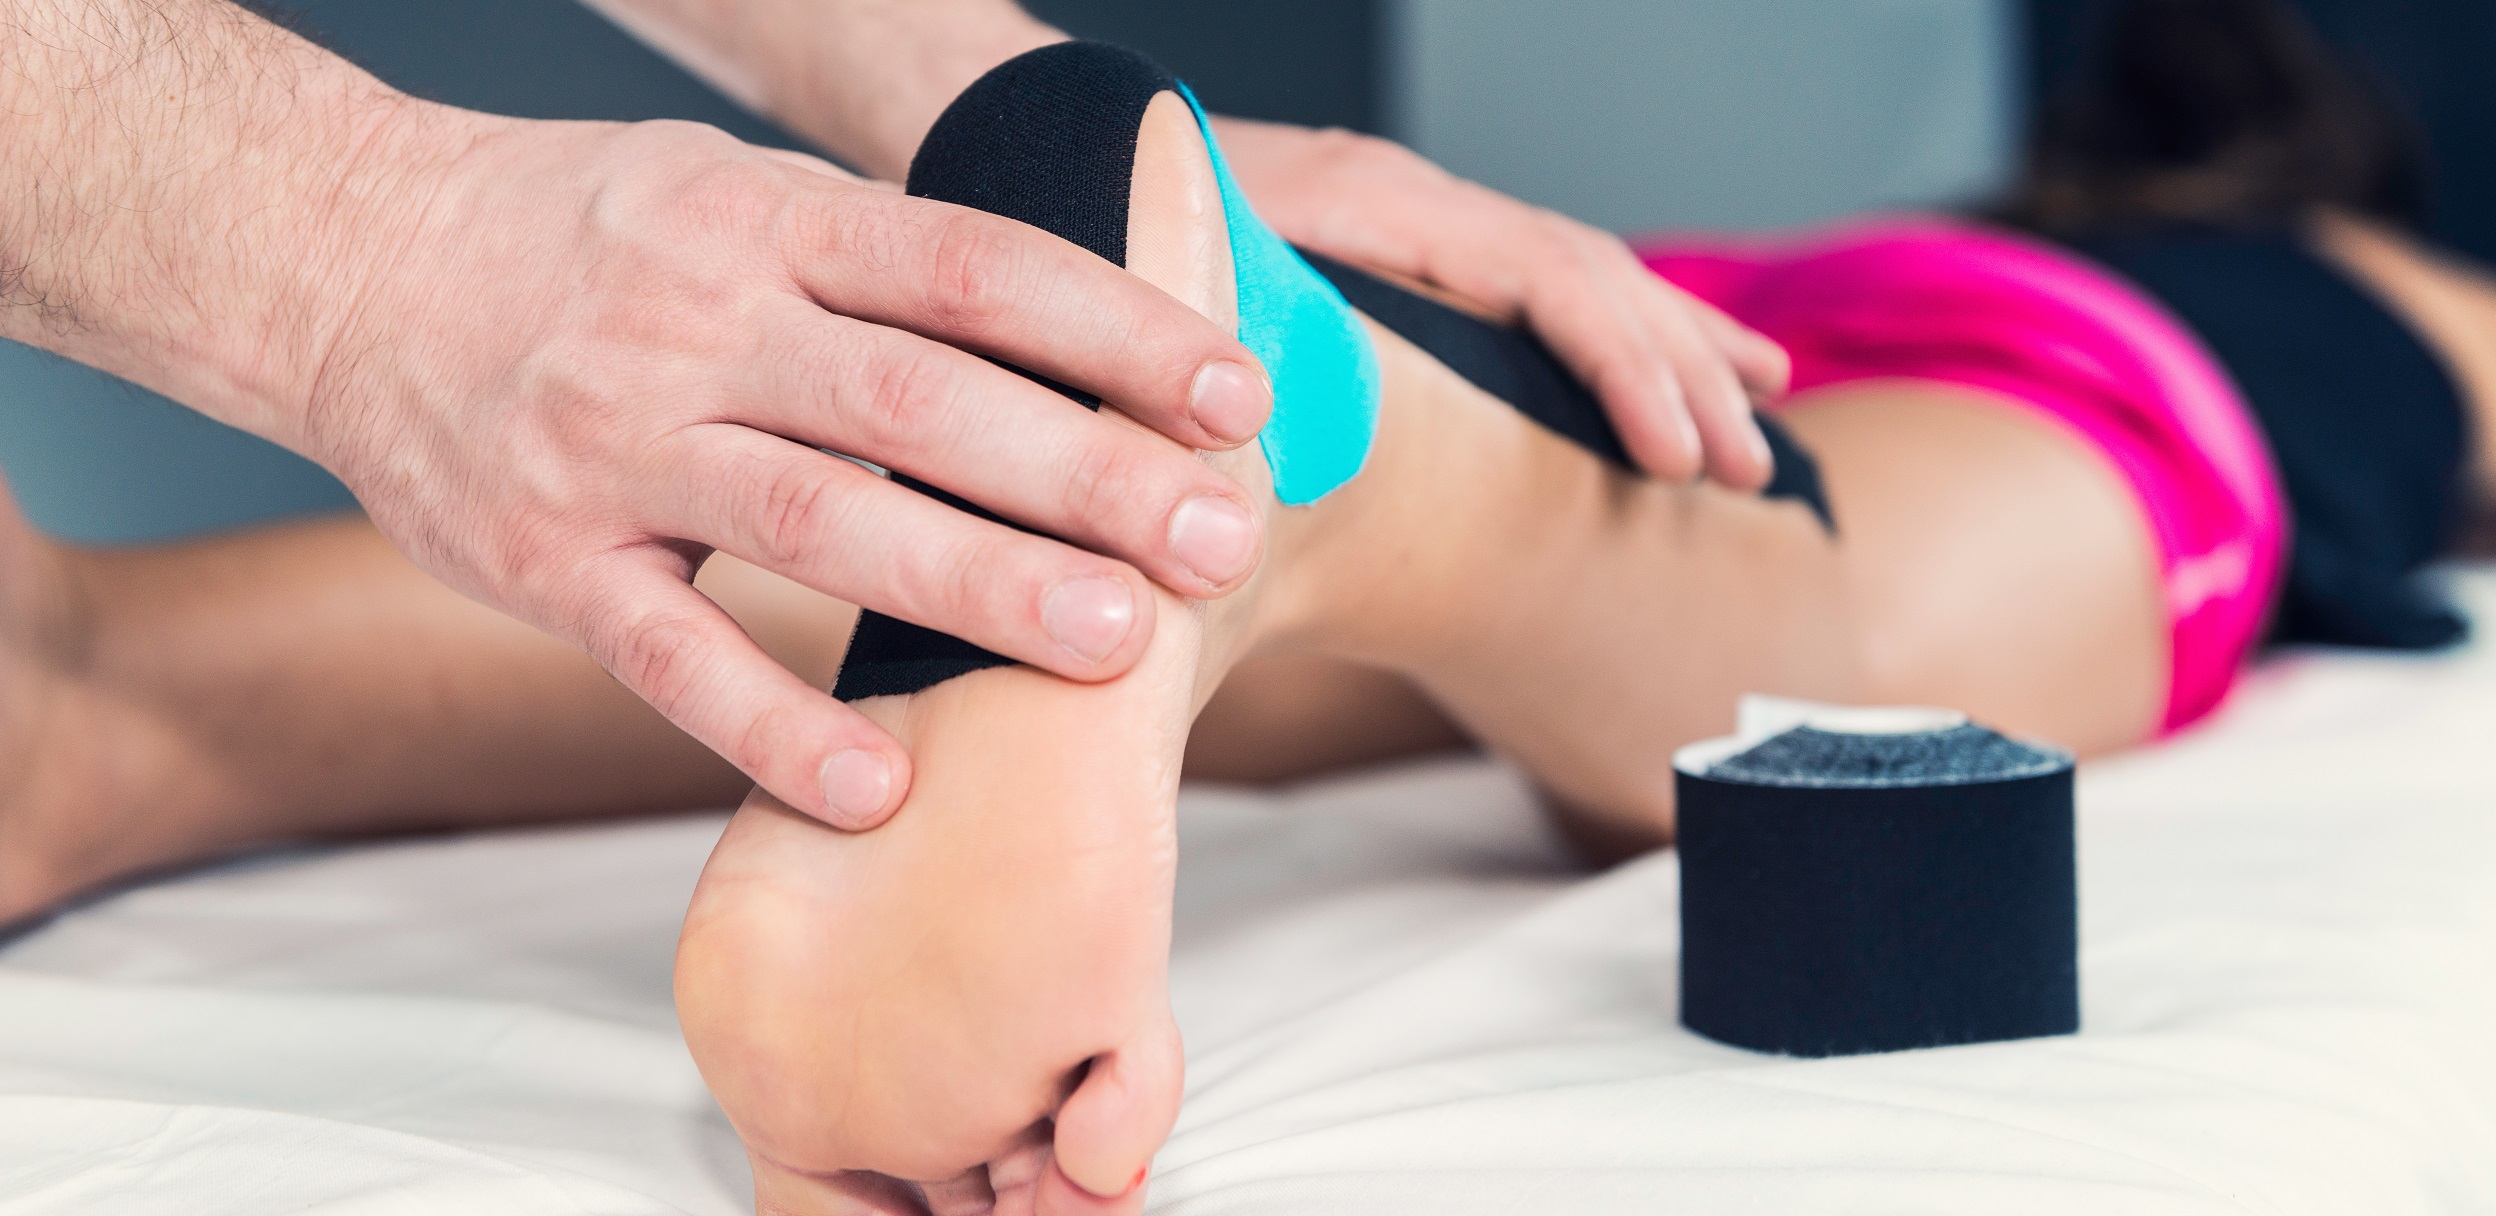 Athlete Rehabilitation: How Physical Therapy Can Help You Recover